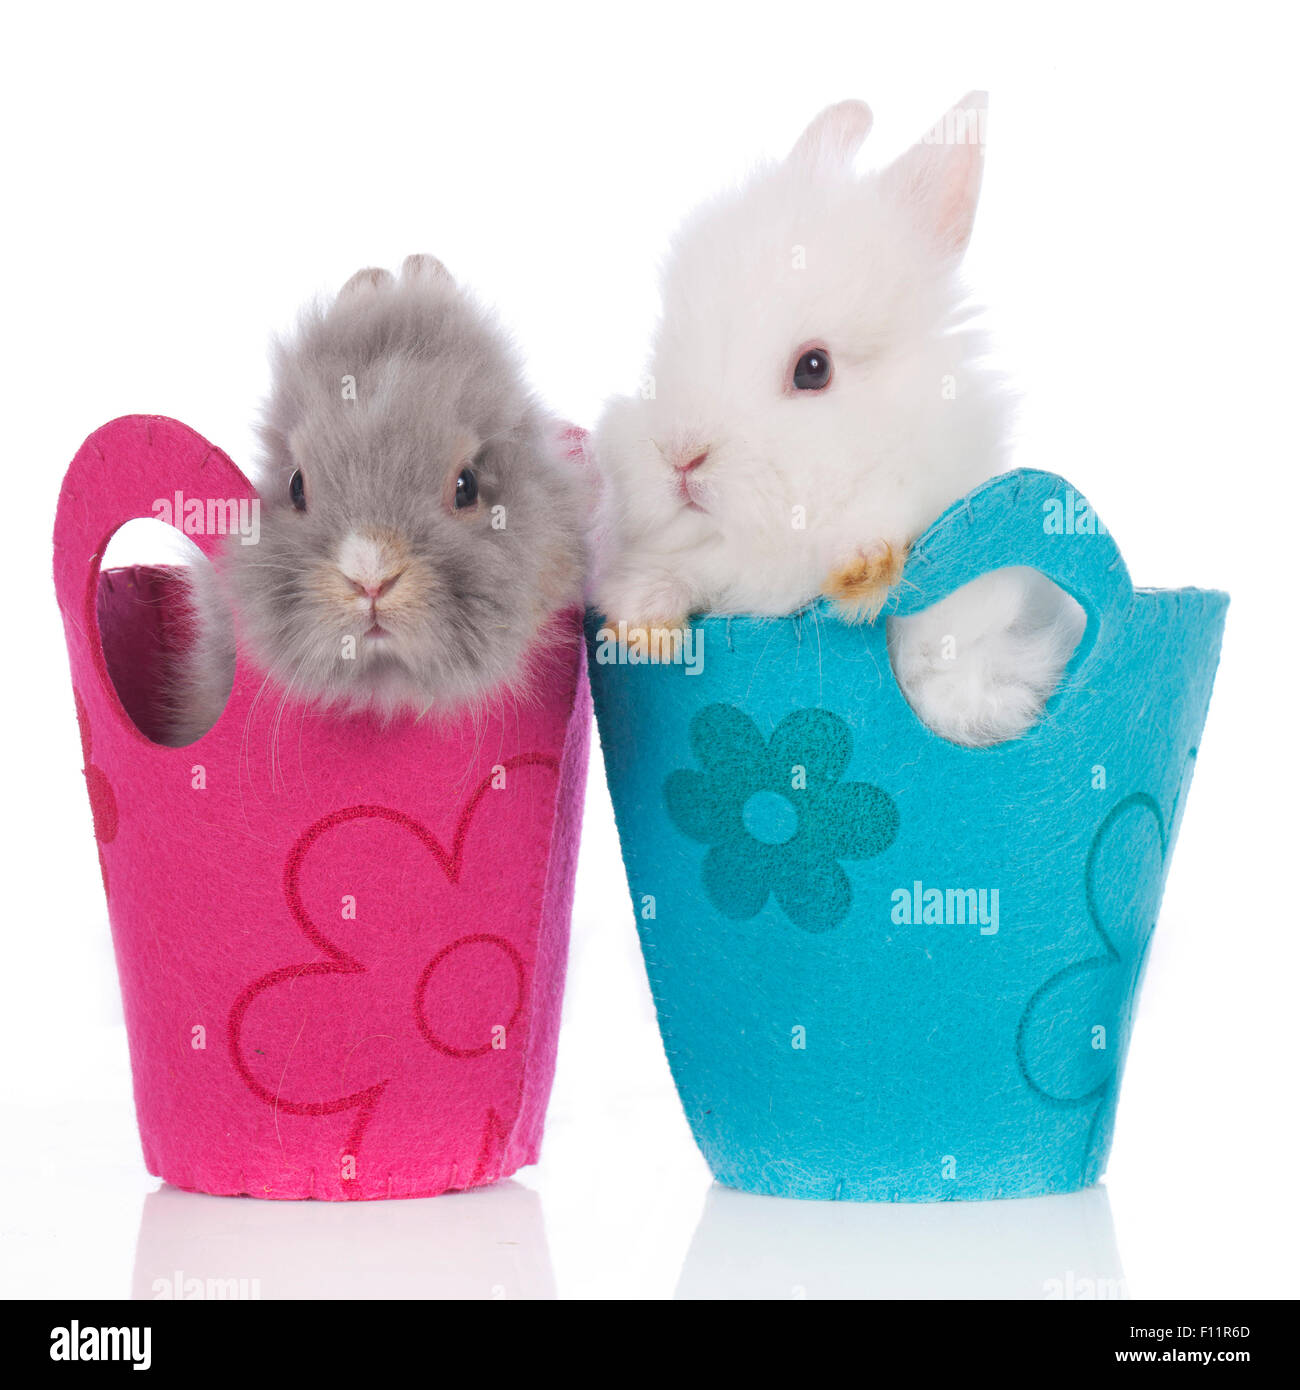 Dwarf Rabbit, Lionhead Rabbit Two individuals red and blue bags Studio picture against white background Stock Photo